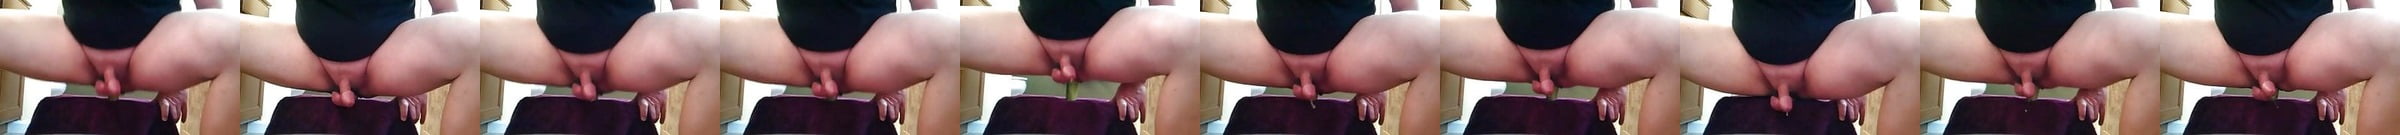 Anal Fuck With Handjob Cum In Ass Gay Porn 74 Xhamster Xhamster